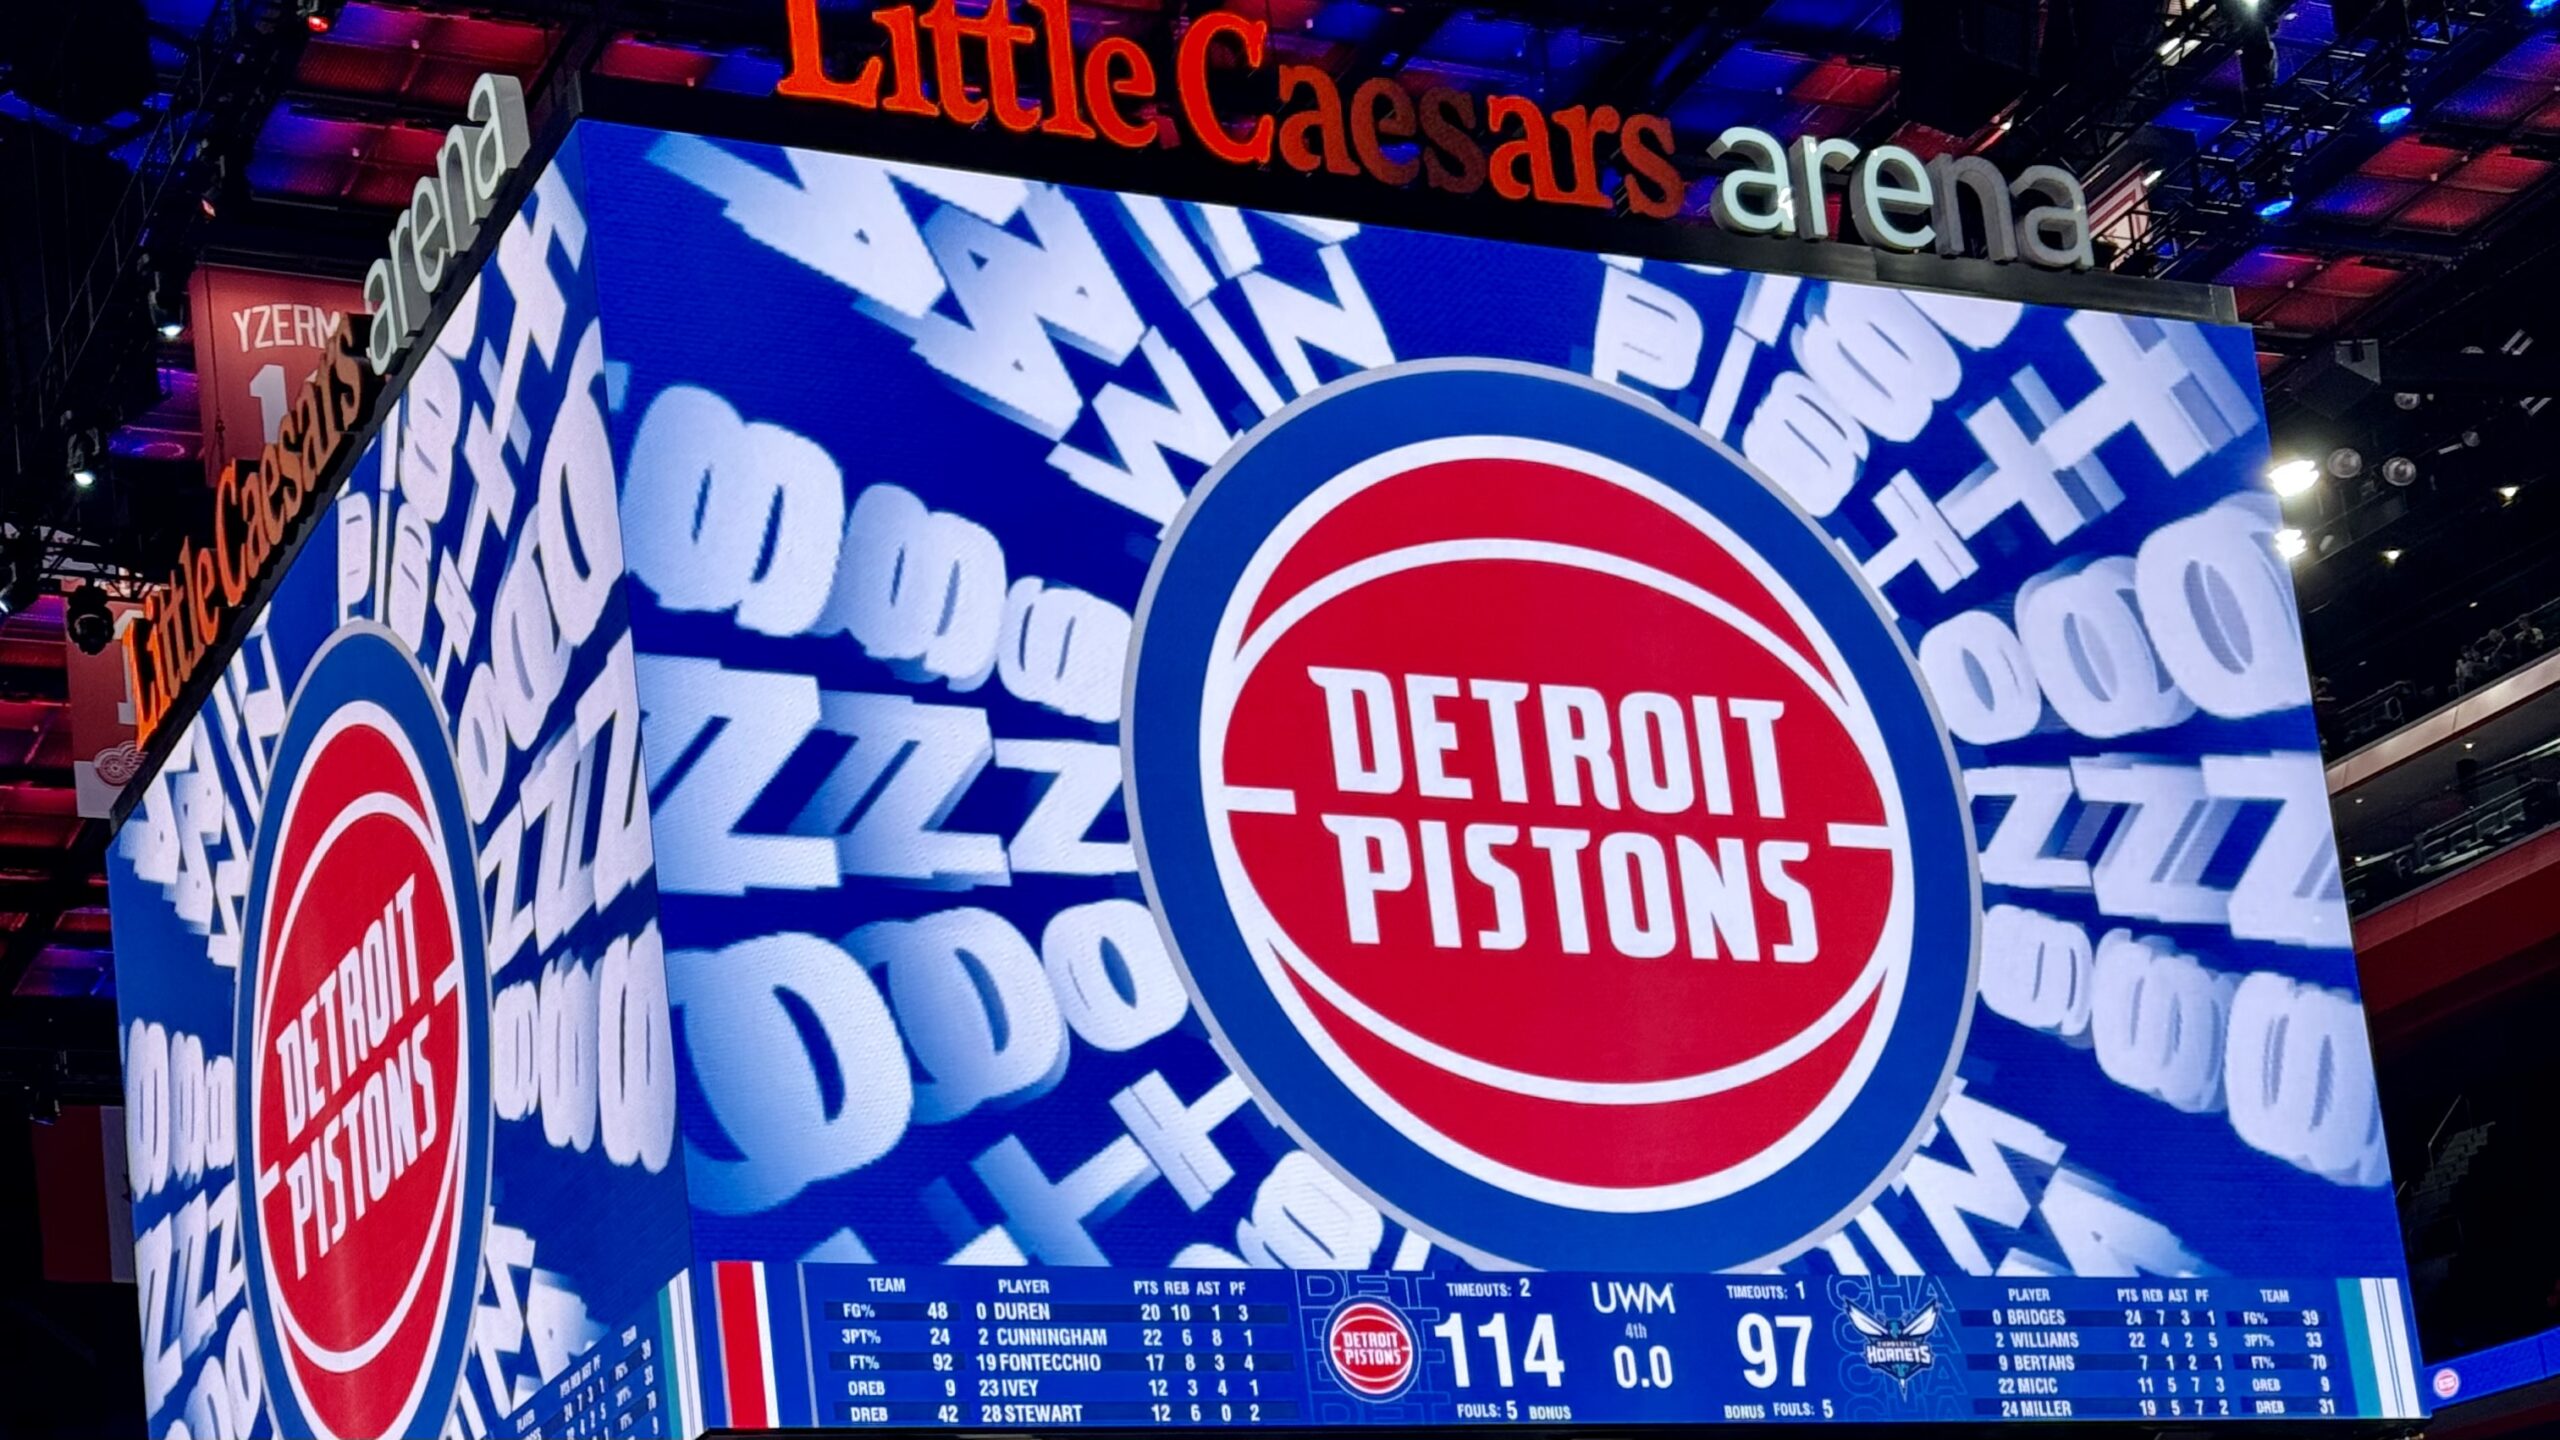 Detroit Pistons defeat the Charlotte Hornets behind stingy defense and balanced offensive attack led by Cade Cunningham. Story by Brandon Dent. Photo Credit Brandon Dent.